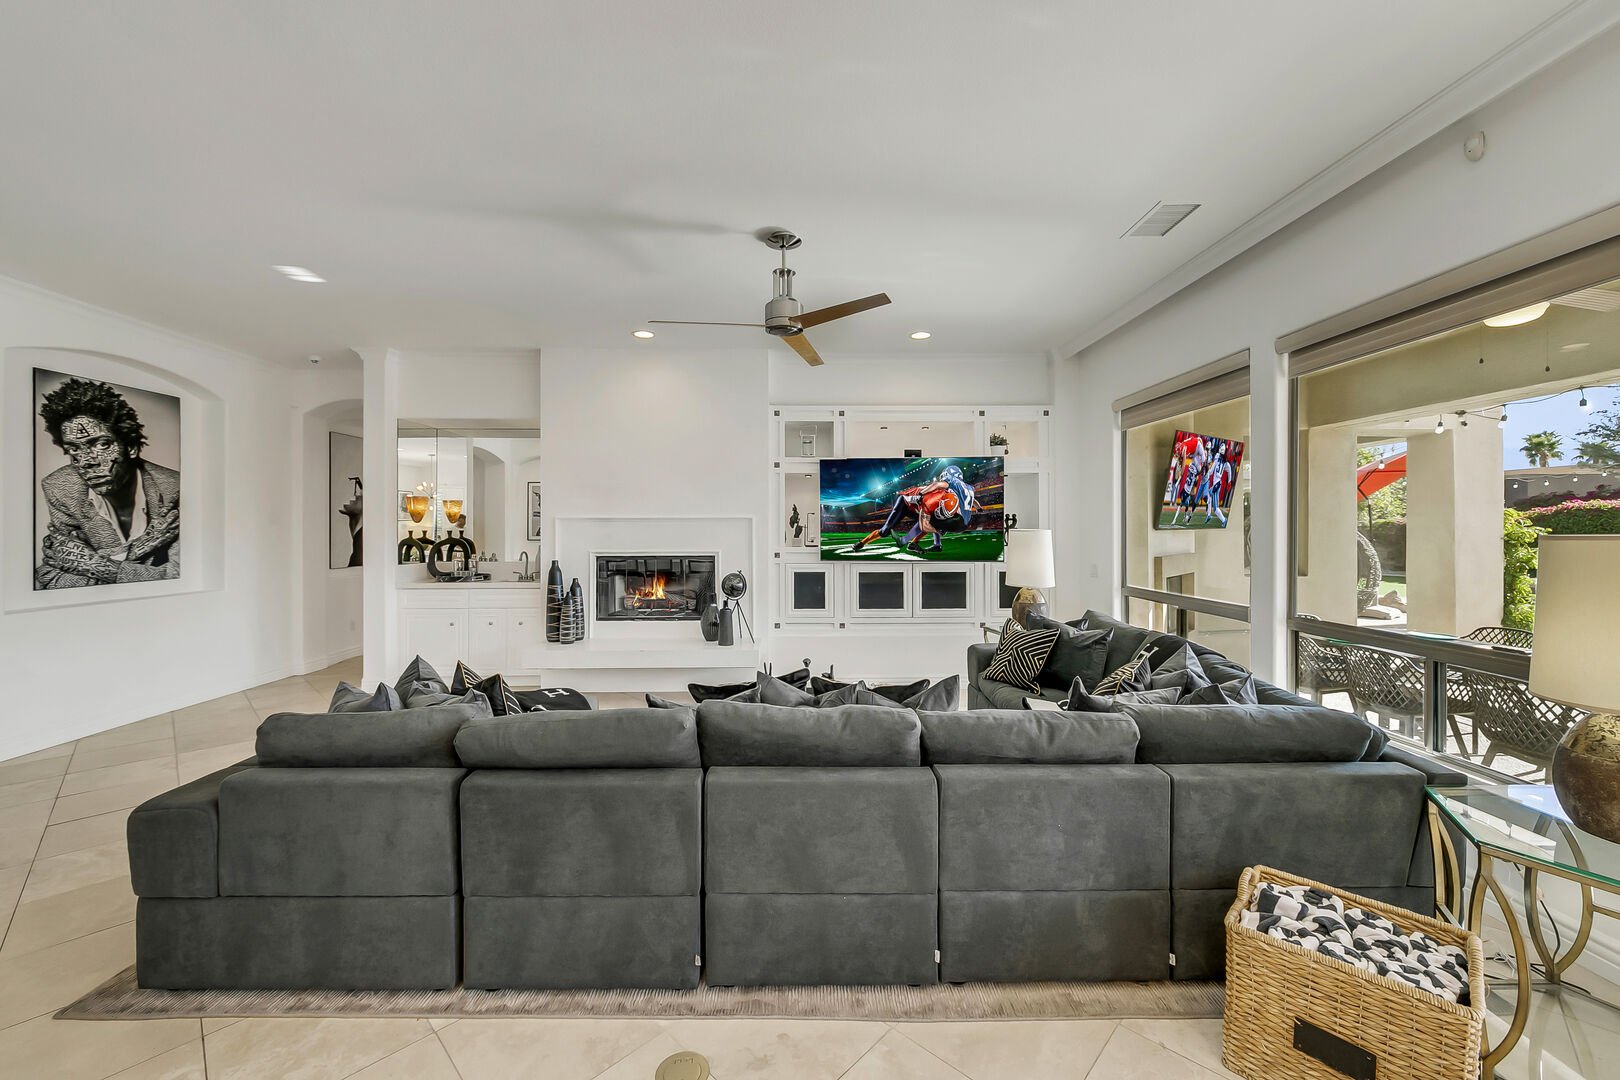 Watch the game on the large HDTV from the oversized cozy couch.